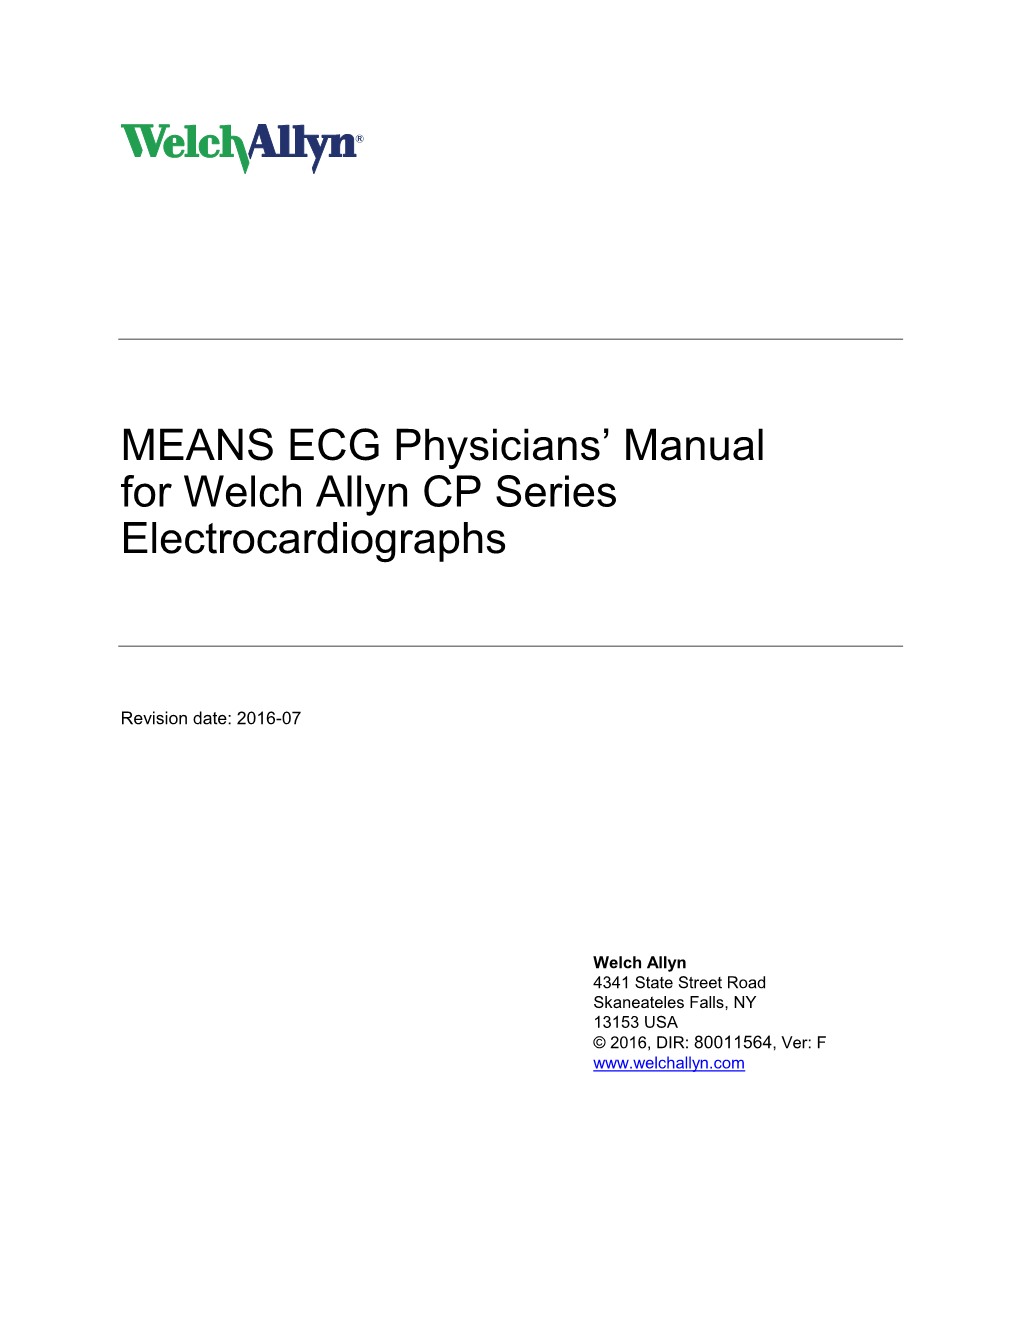 MEANS ECG Physicians' Manual